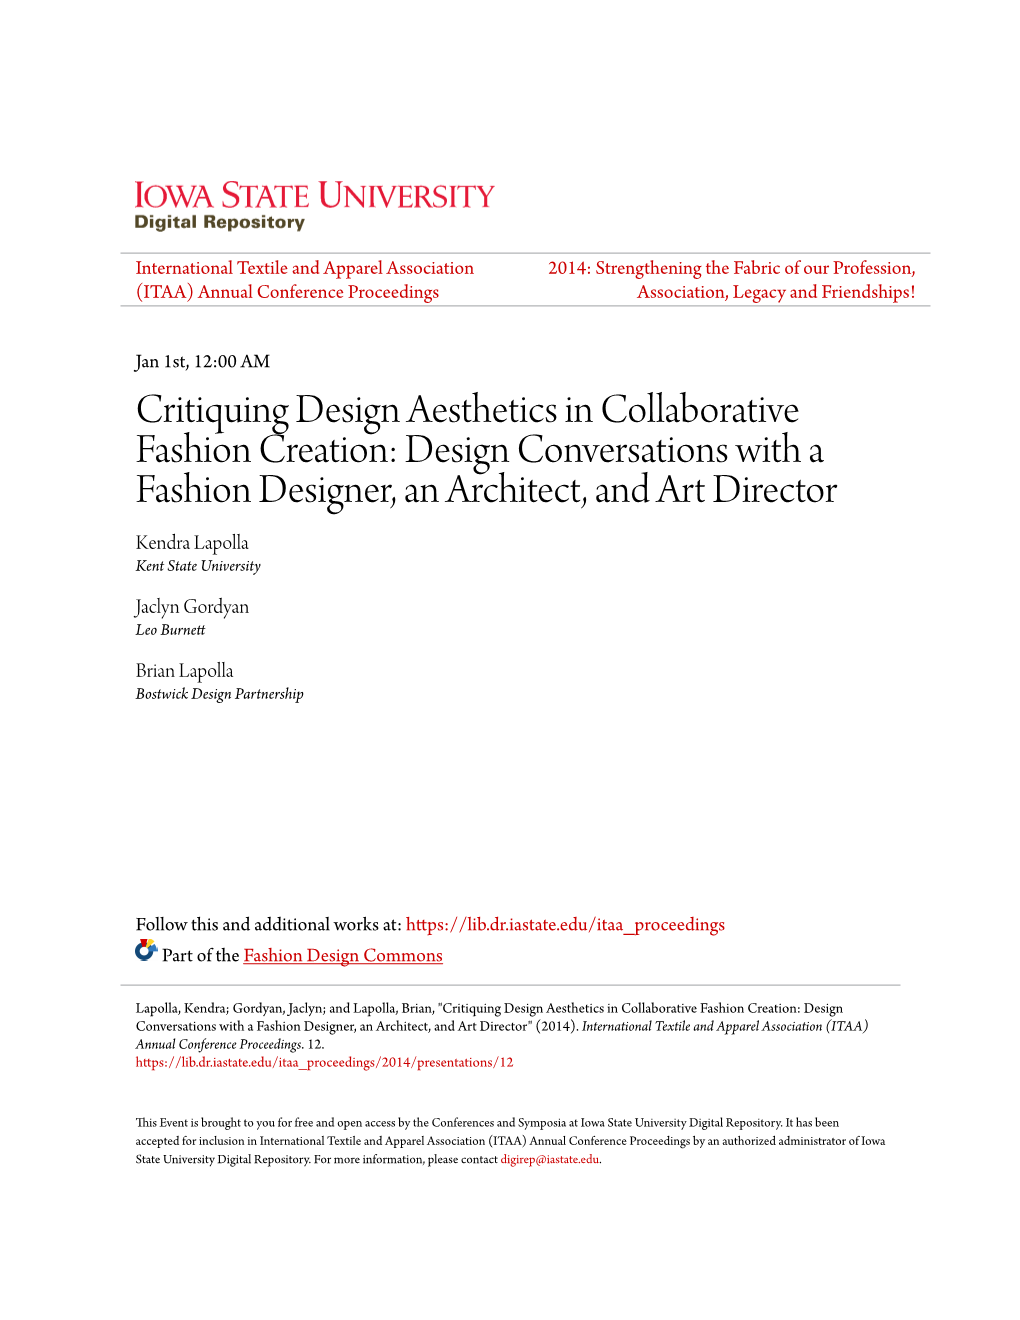 Design Conversations with a Fashion Designer, an Architect, and Art Director Kendra Lapolla Kent State University